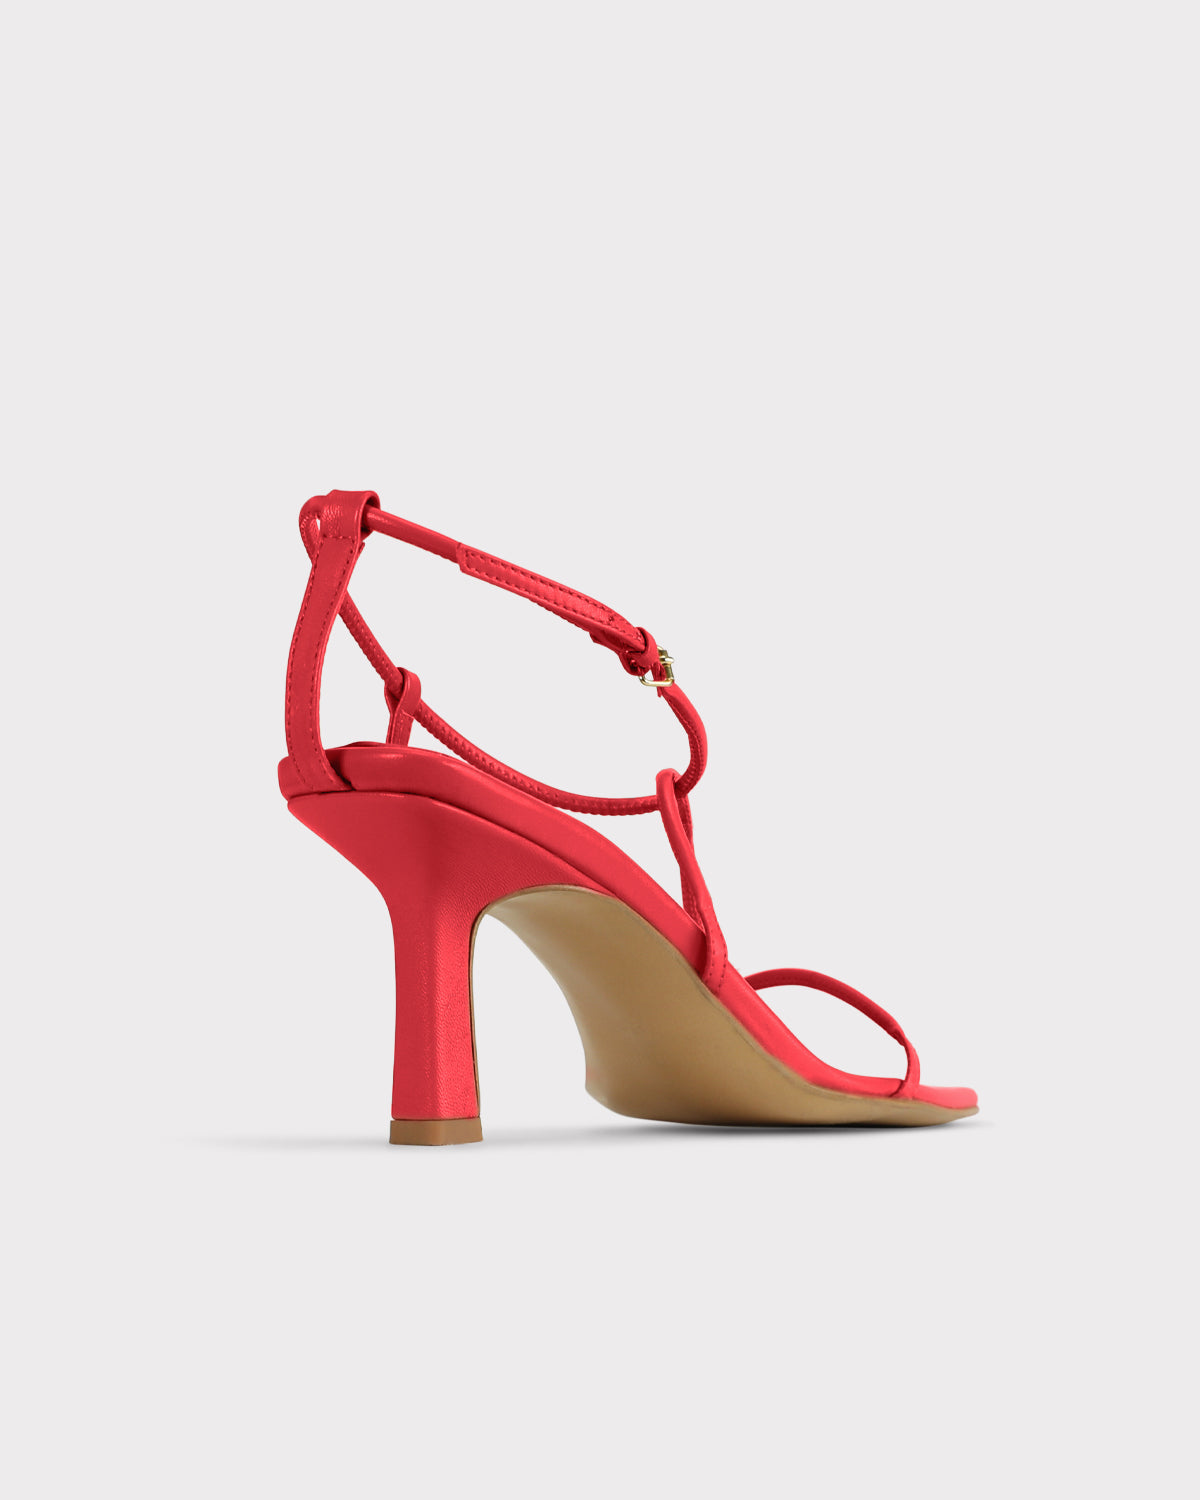 slow fashion brand strappy evening sandal in red